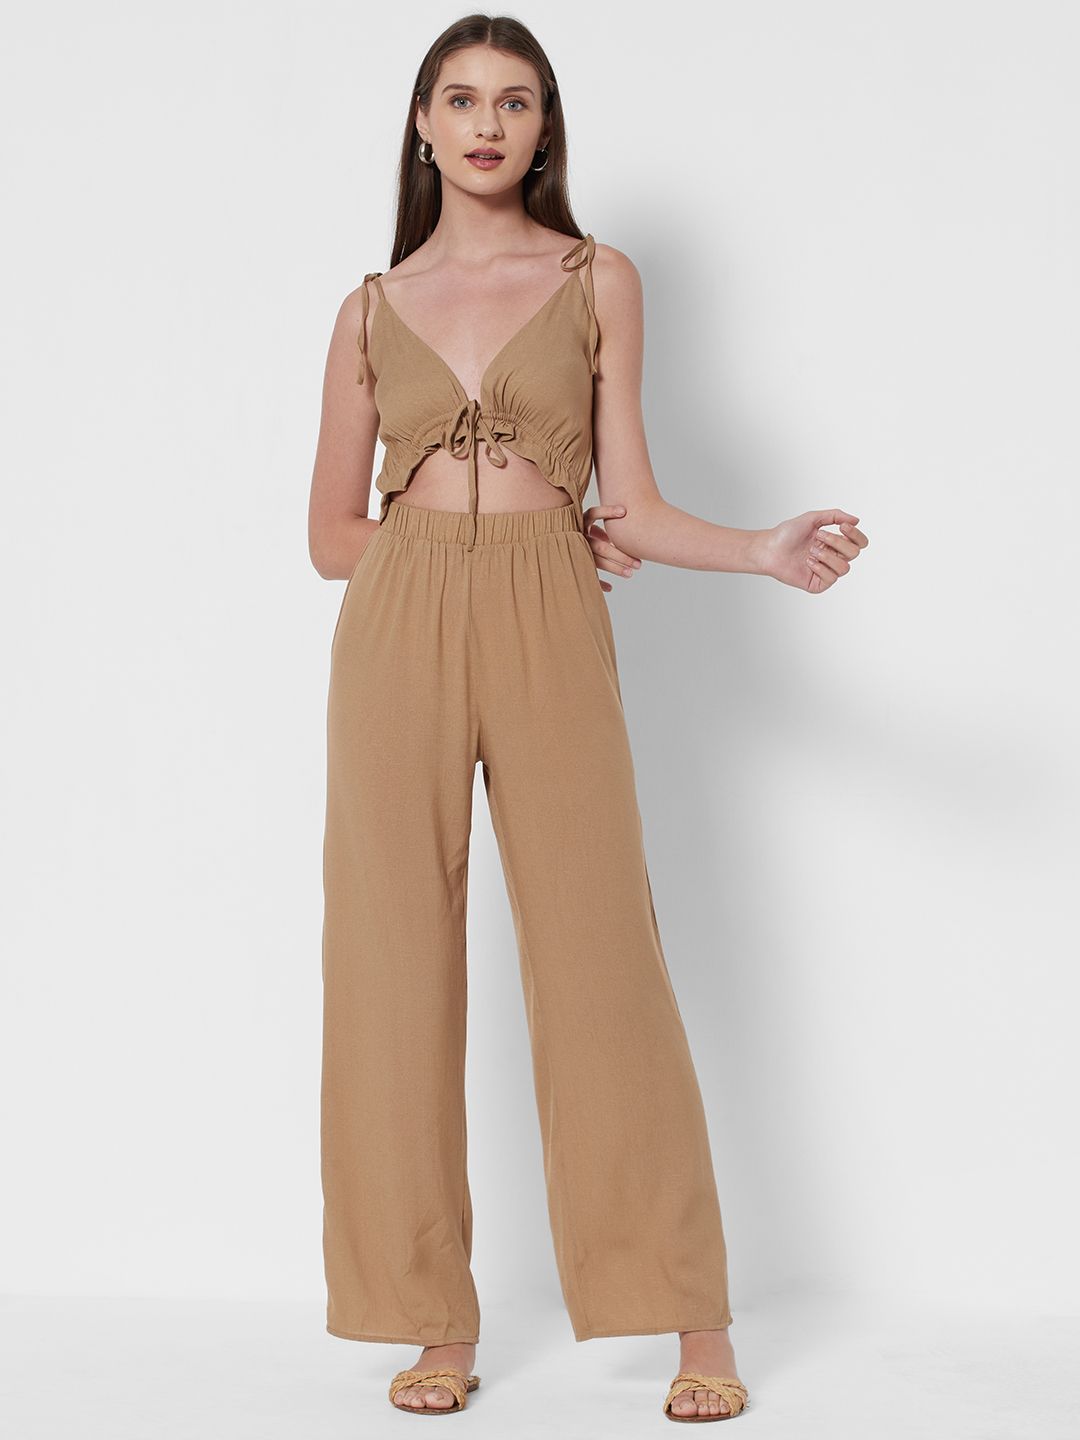 URBANIC Beige Cut-Out Basic Jumpsuit with Tie-Ups Price in India